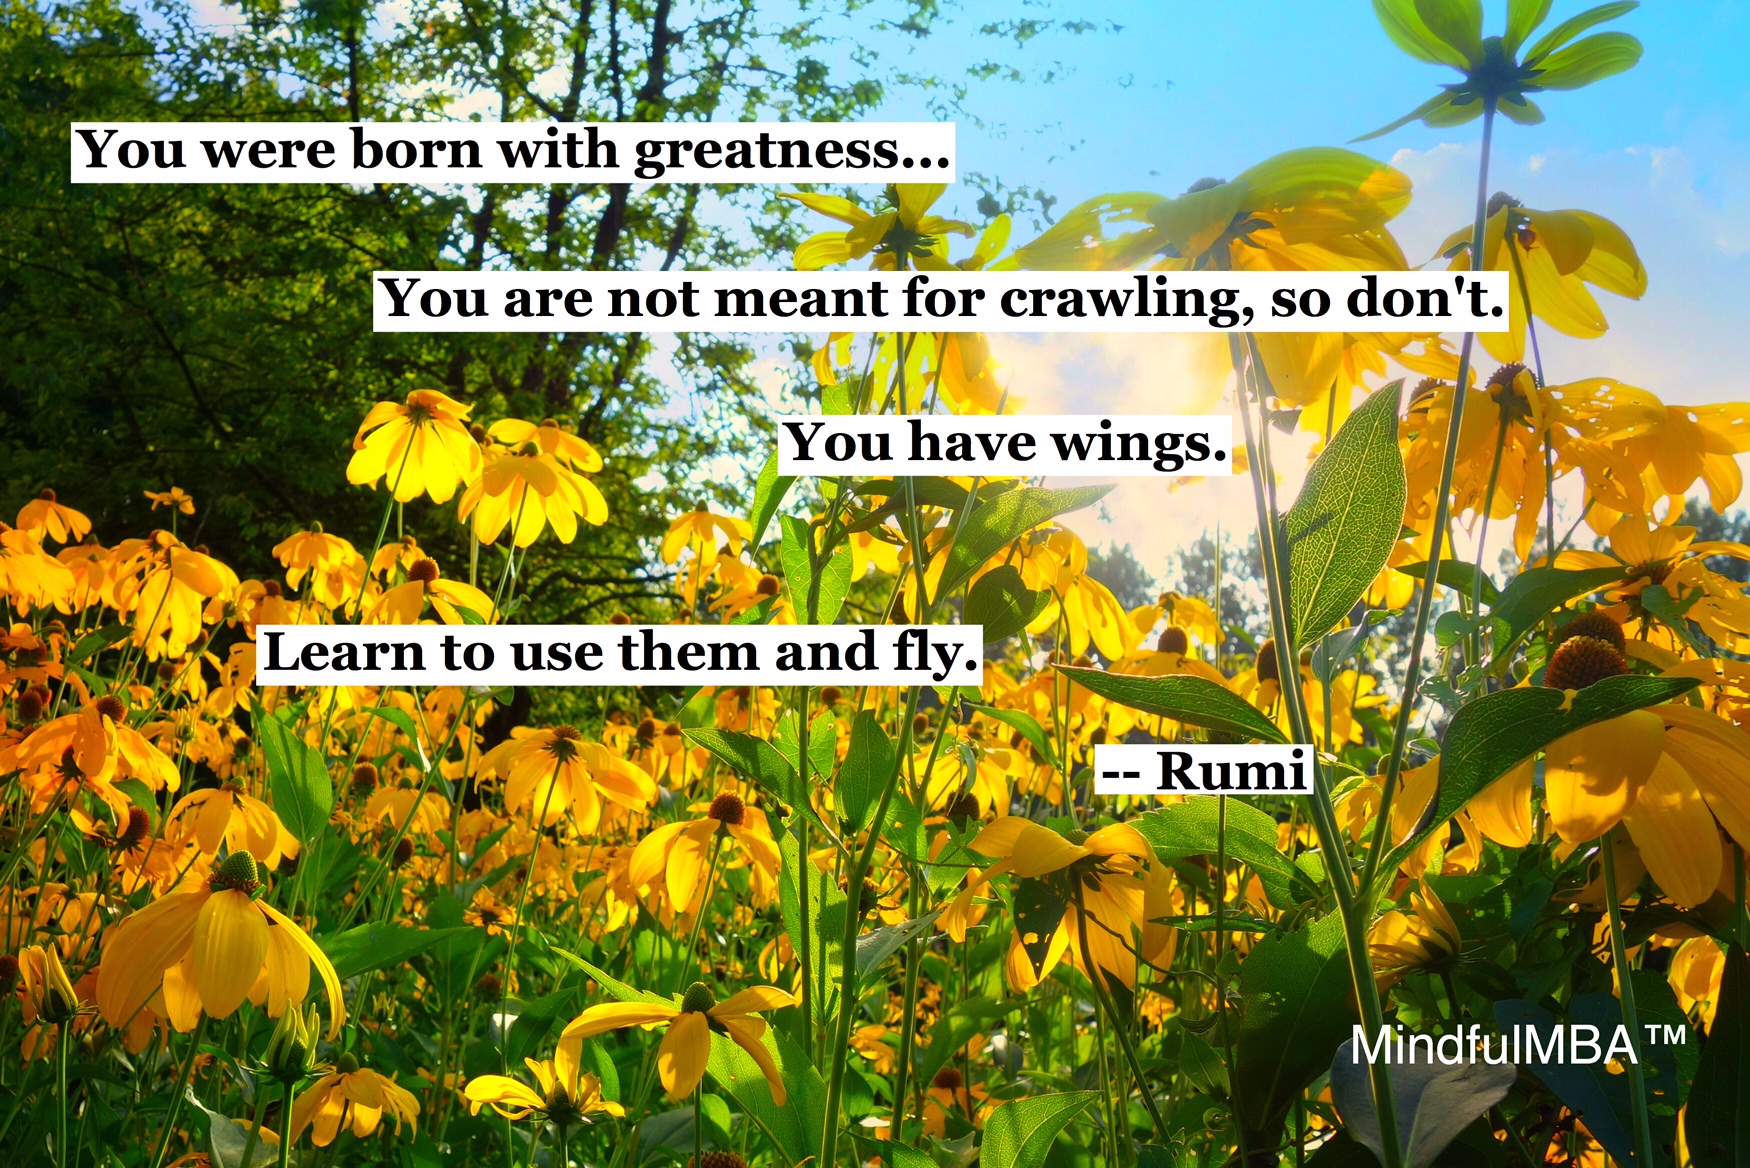 rumi-wings-quote-w-tag